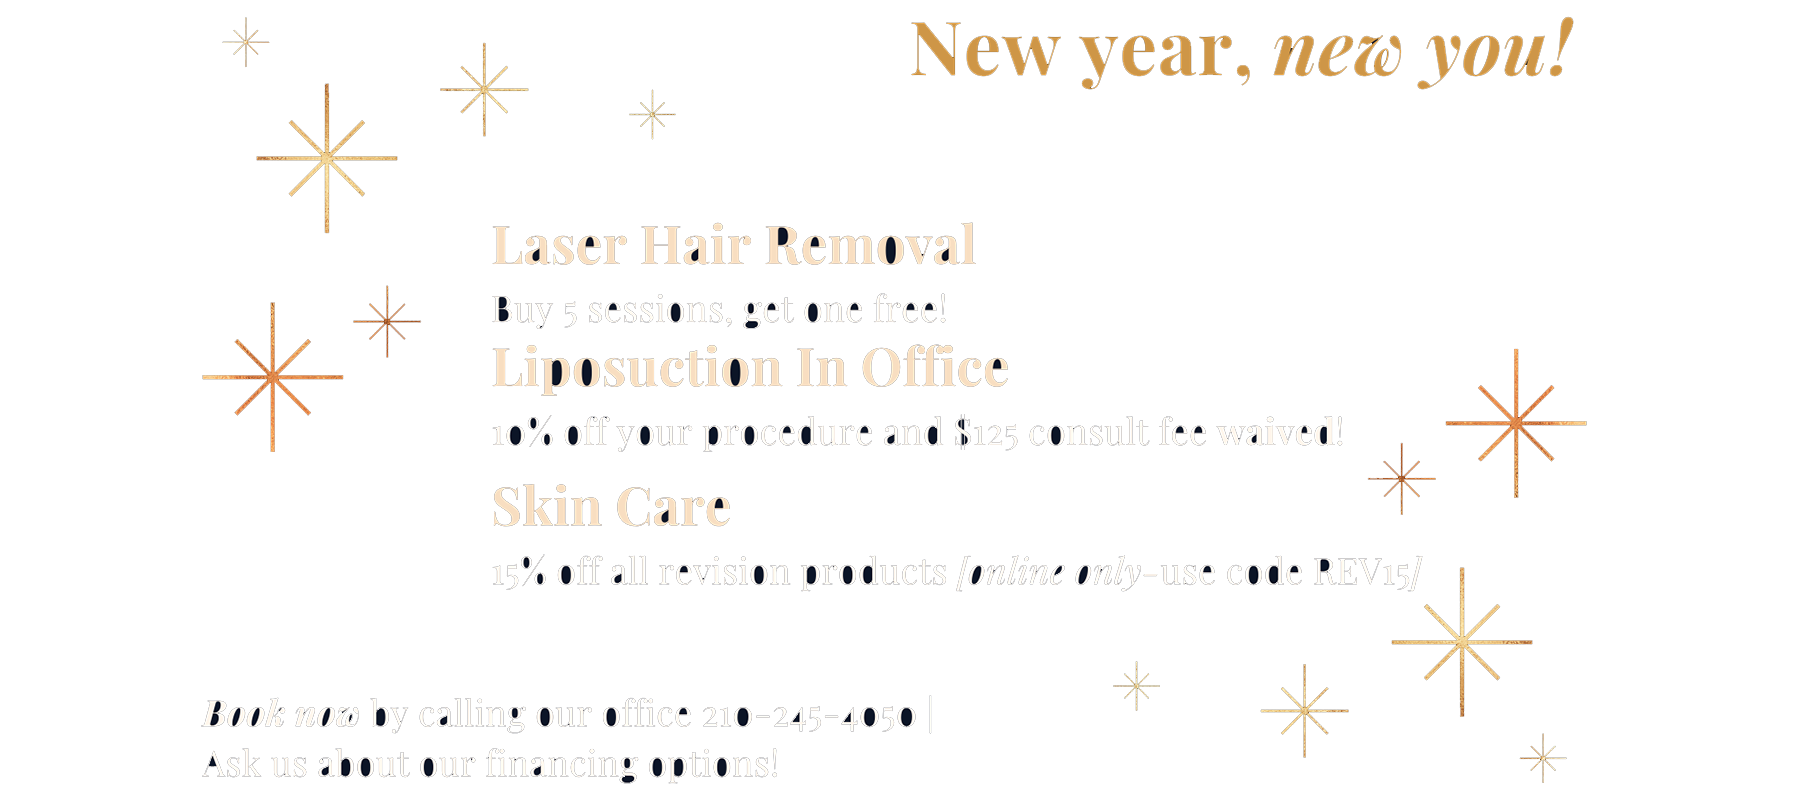 Jan 2022 Specials - New year, new you! - Laser Hair Removal, Liposuction, Skin Care, Revision